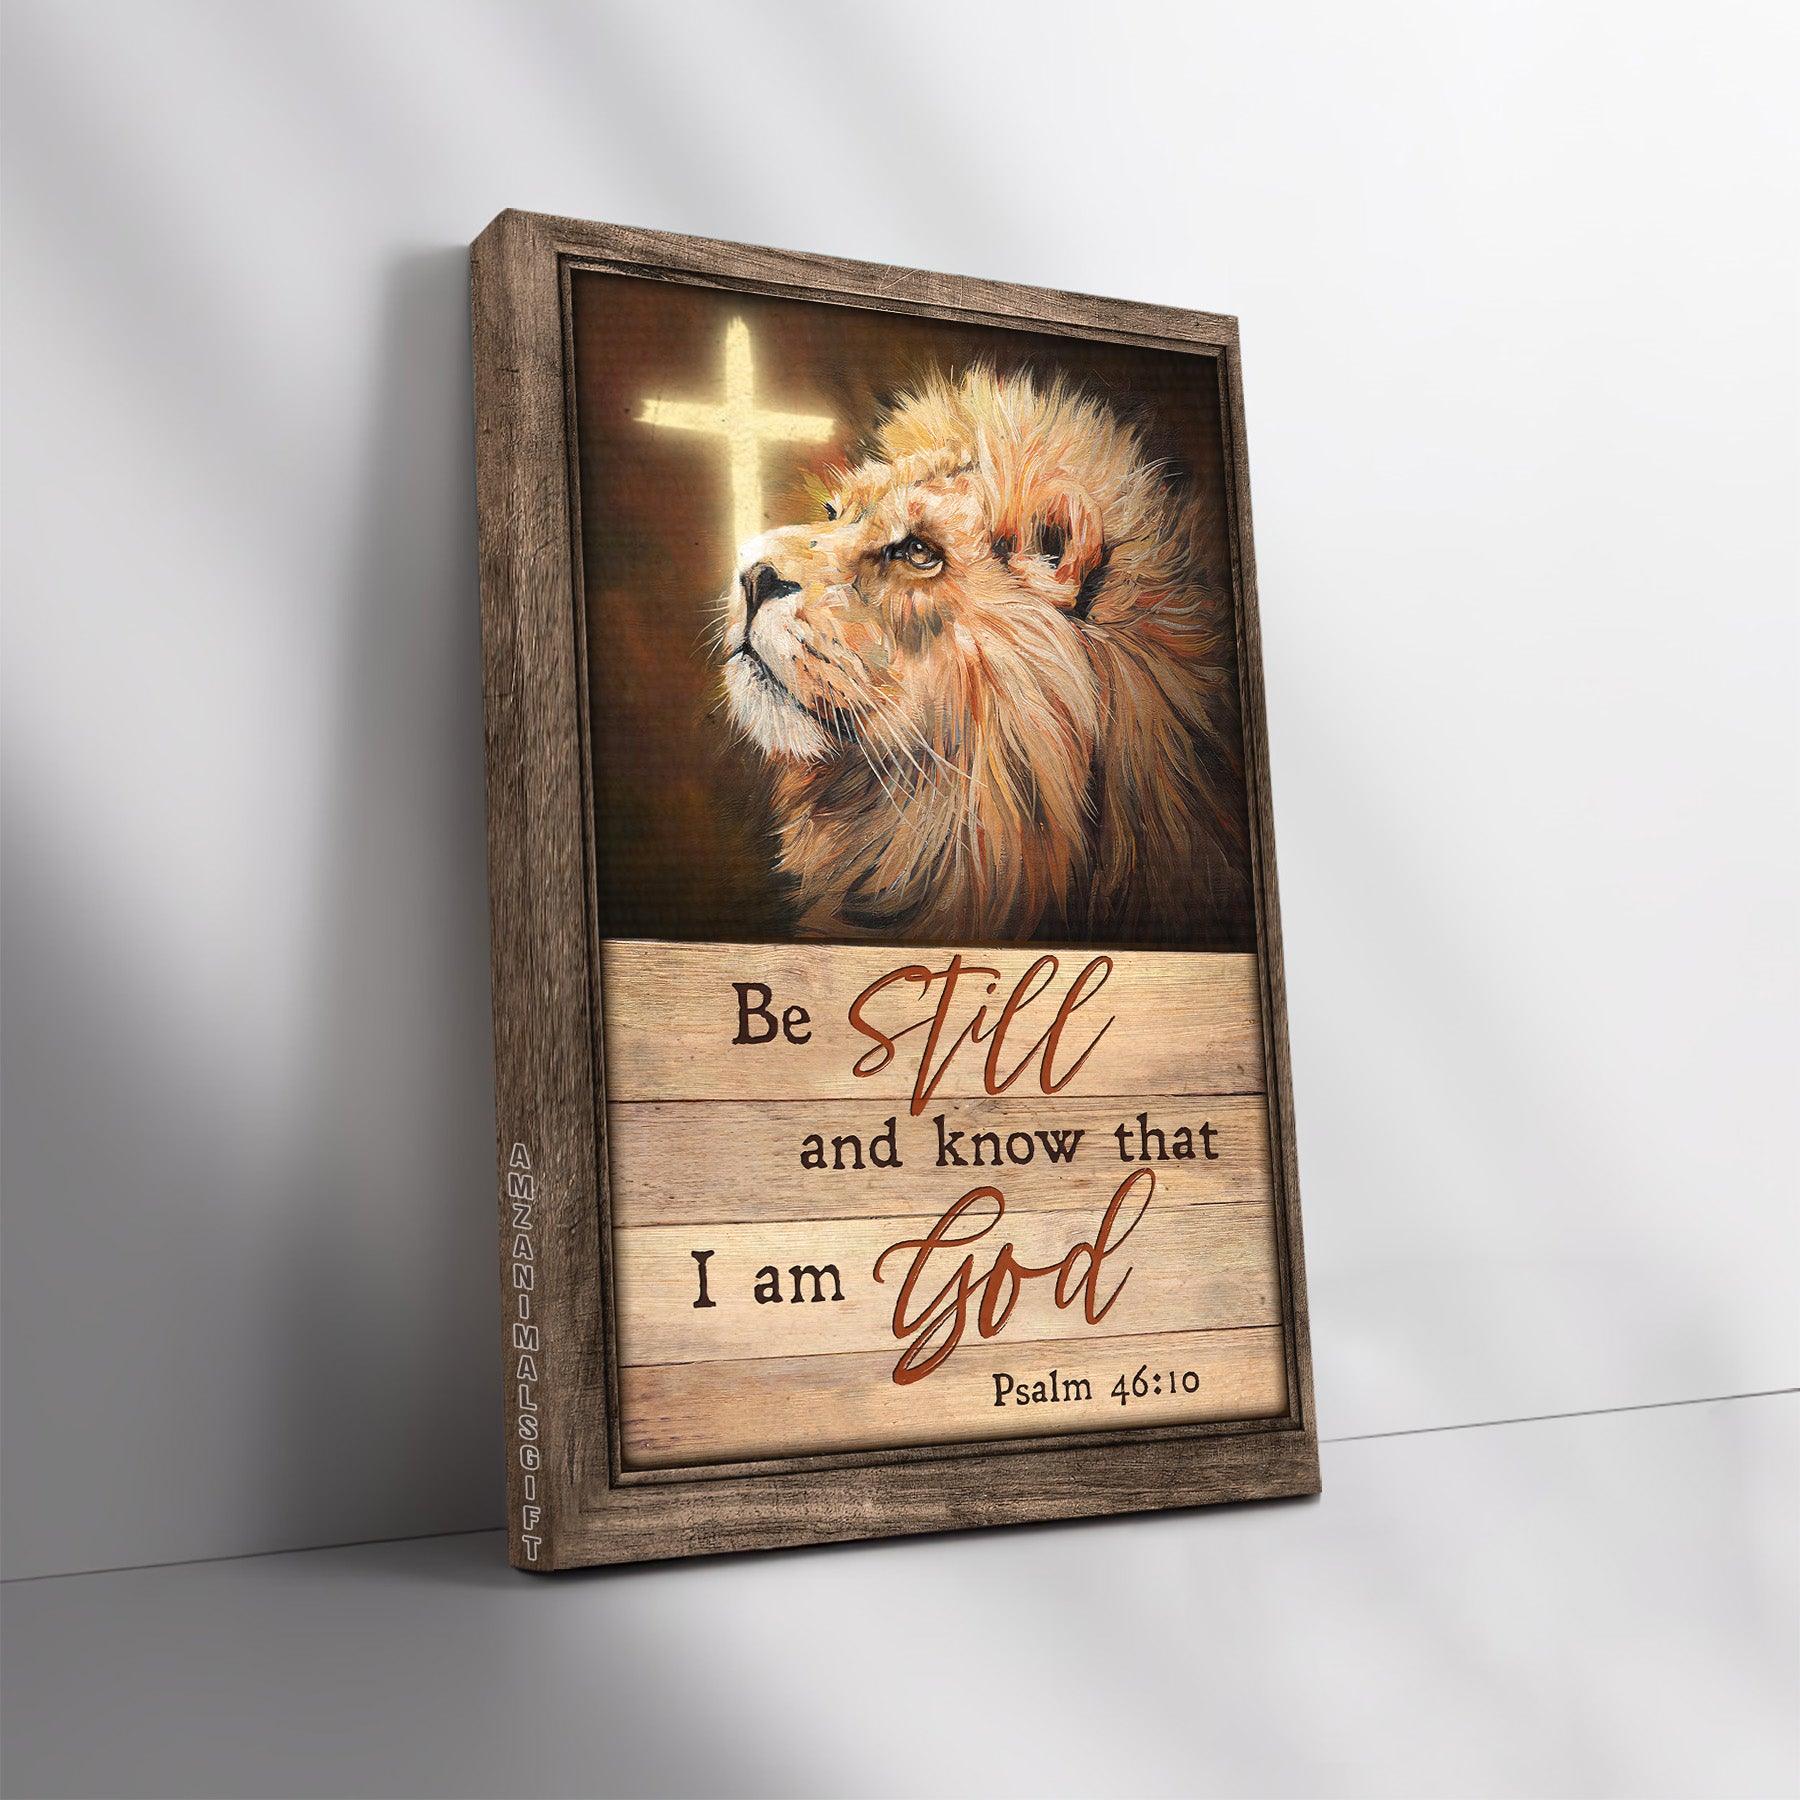 Jesus Portrait Canvas - Lion of Judah, Cross light, Be still and know that I am God Canvas - Perfect Gift for Christian, Friends, Family - Amzanimalsgift